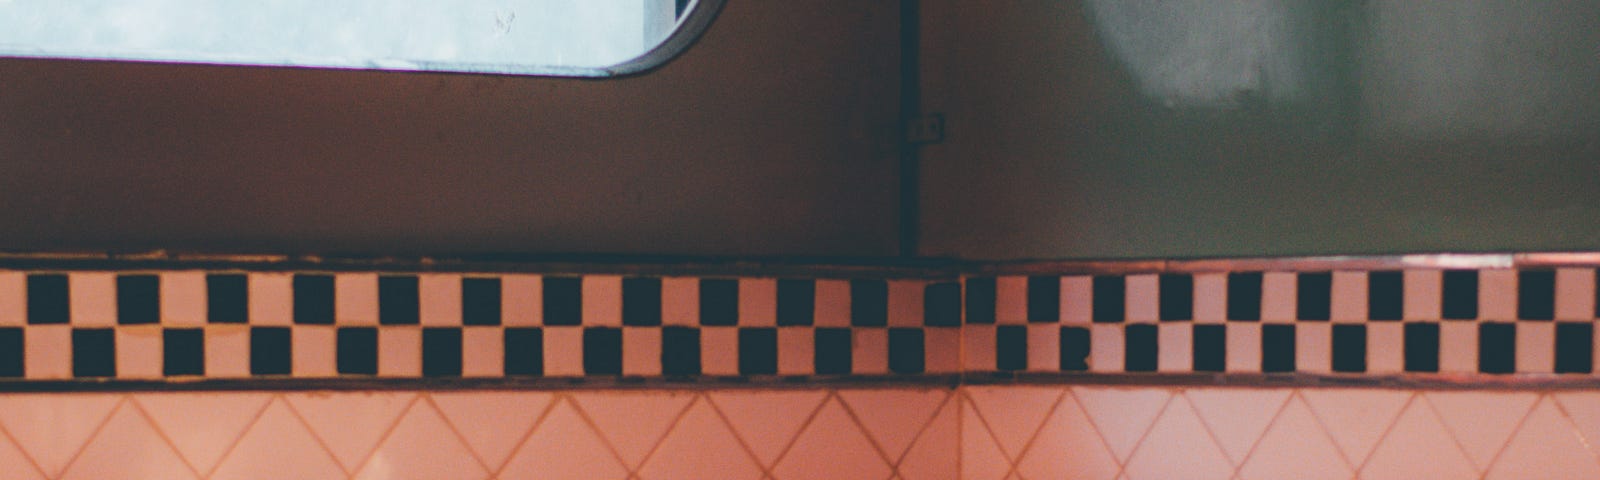 a photo of a booth and table inside a retro diner